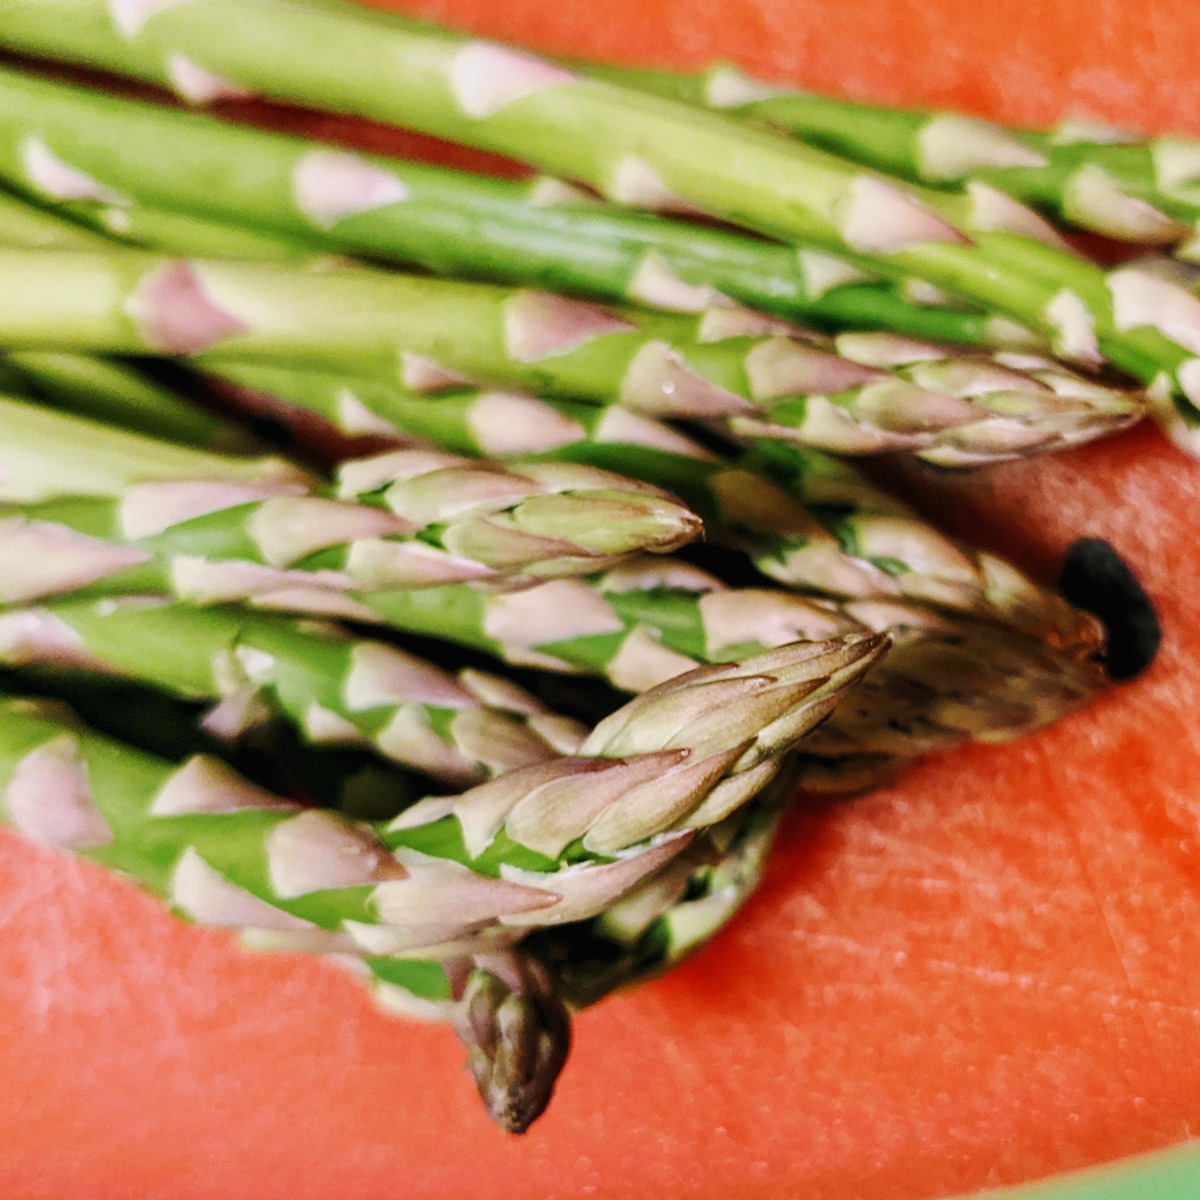 Fresh asparagus on a red plastic cutting board - Asparagus Companion Plants help you make the most of your garden space. 